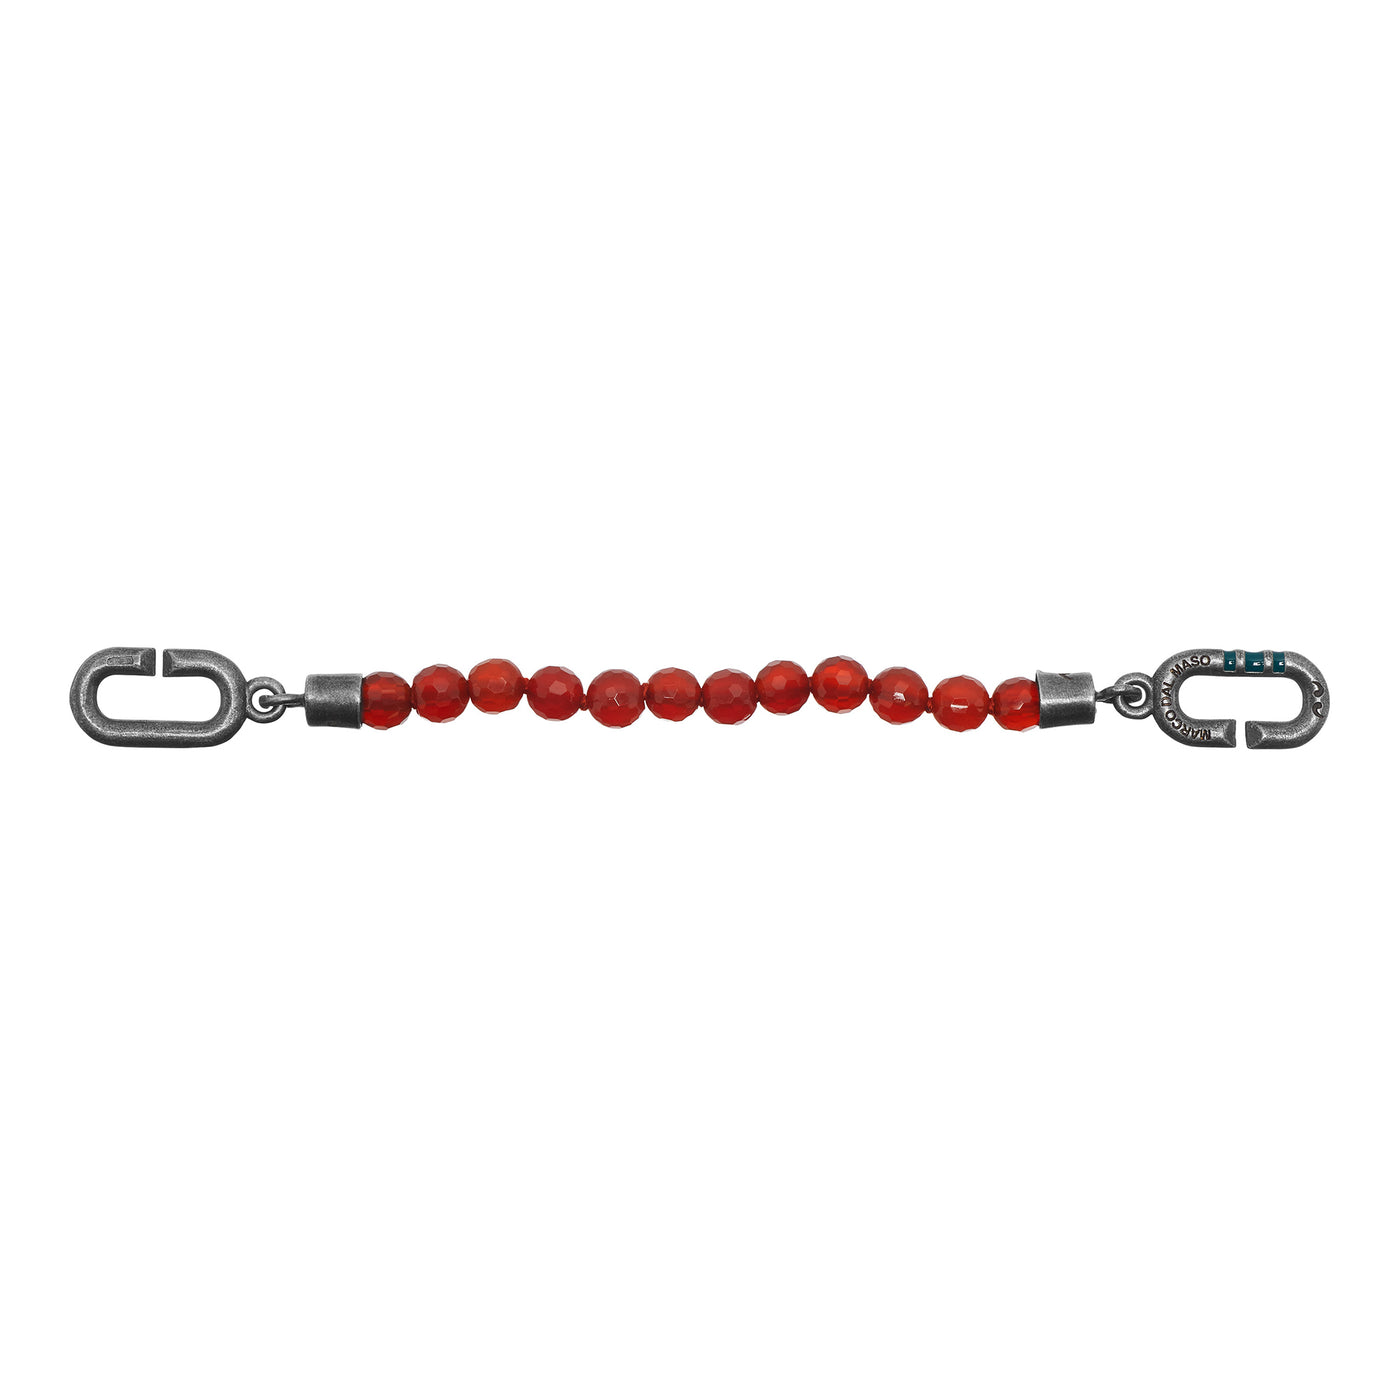 THE LINK Carnelian Extension Beads